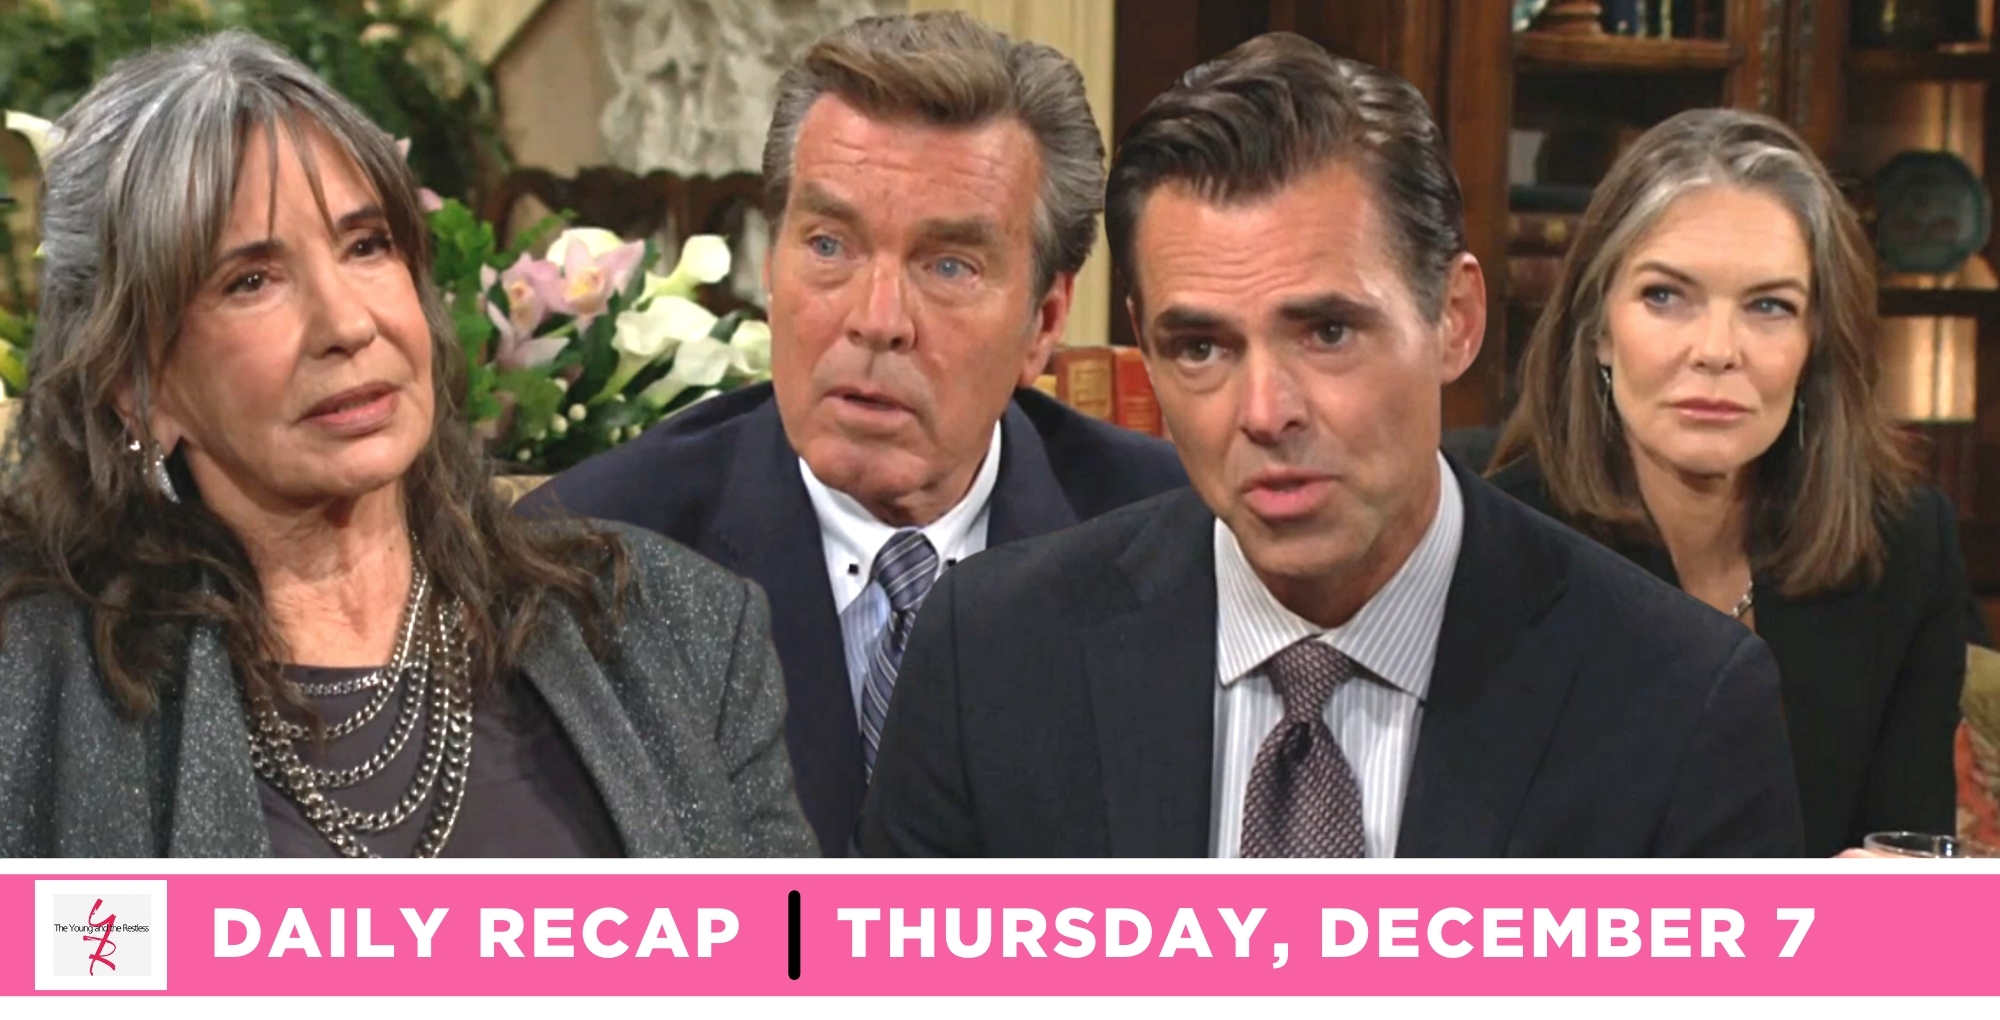 the young and the restless recap for december 7, episode 12761, has jill, jack, billy, and diane talking.